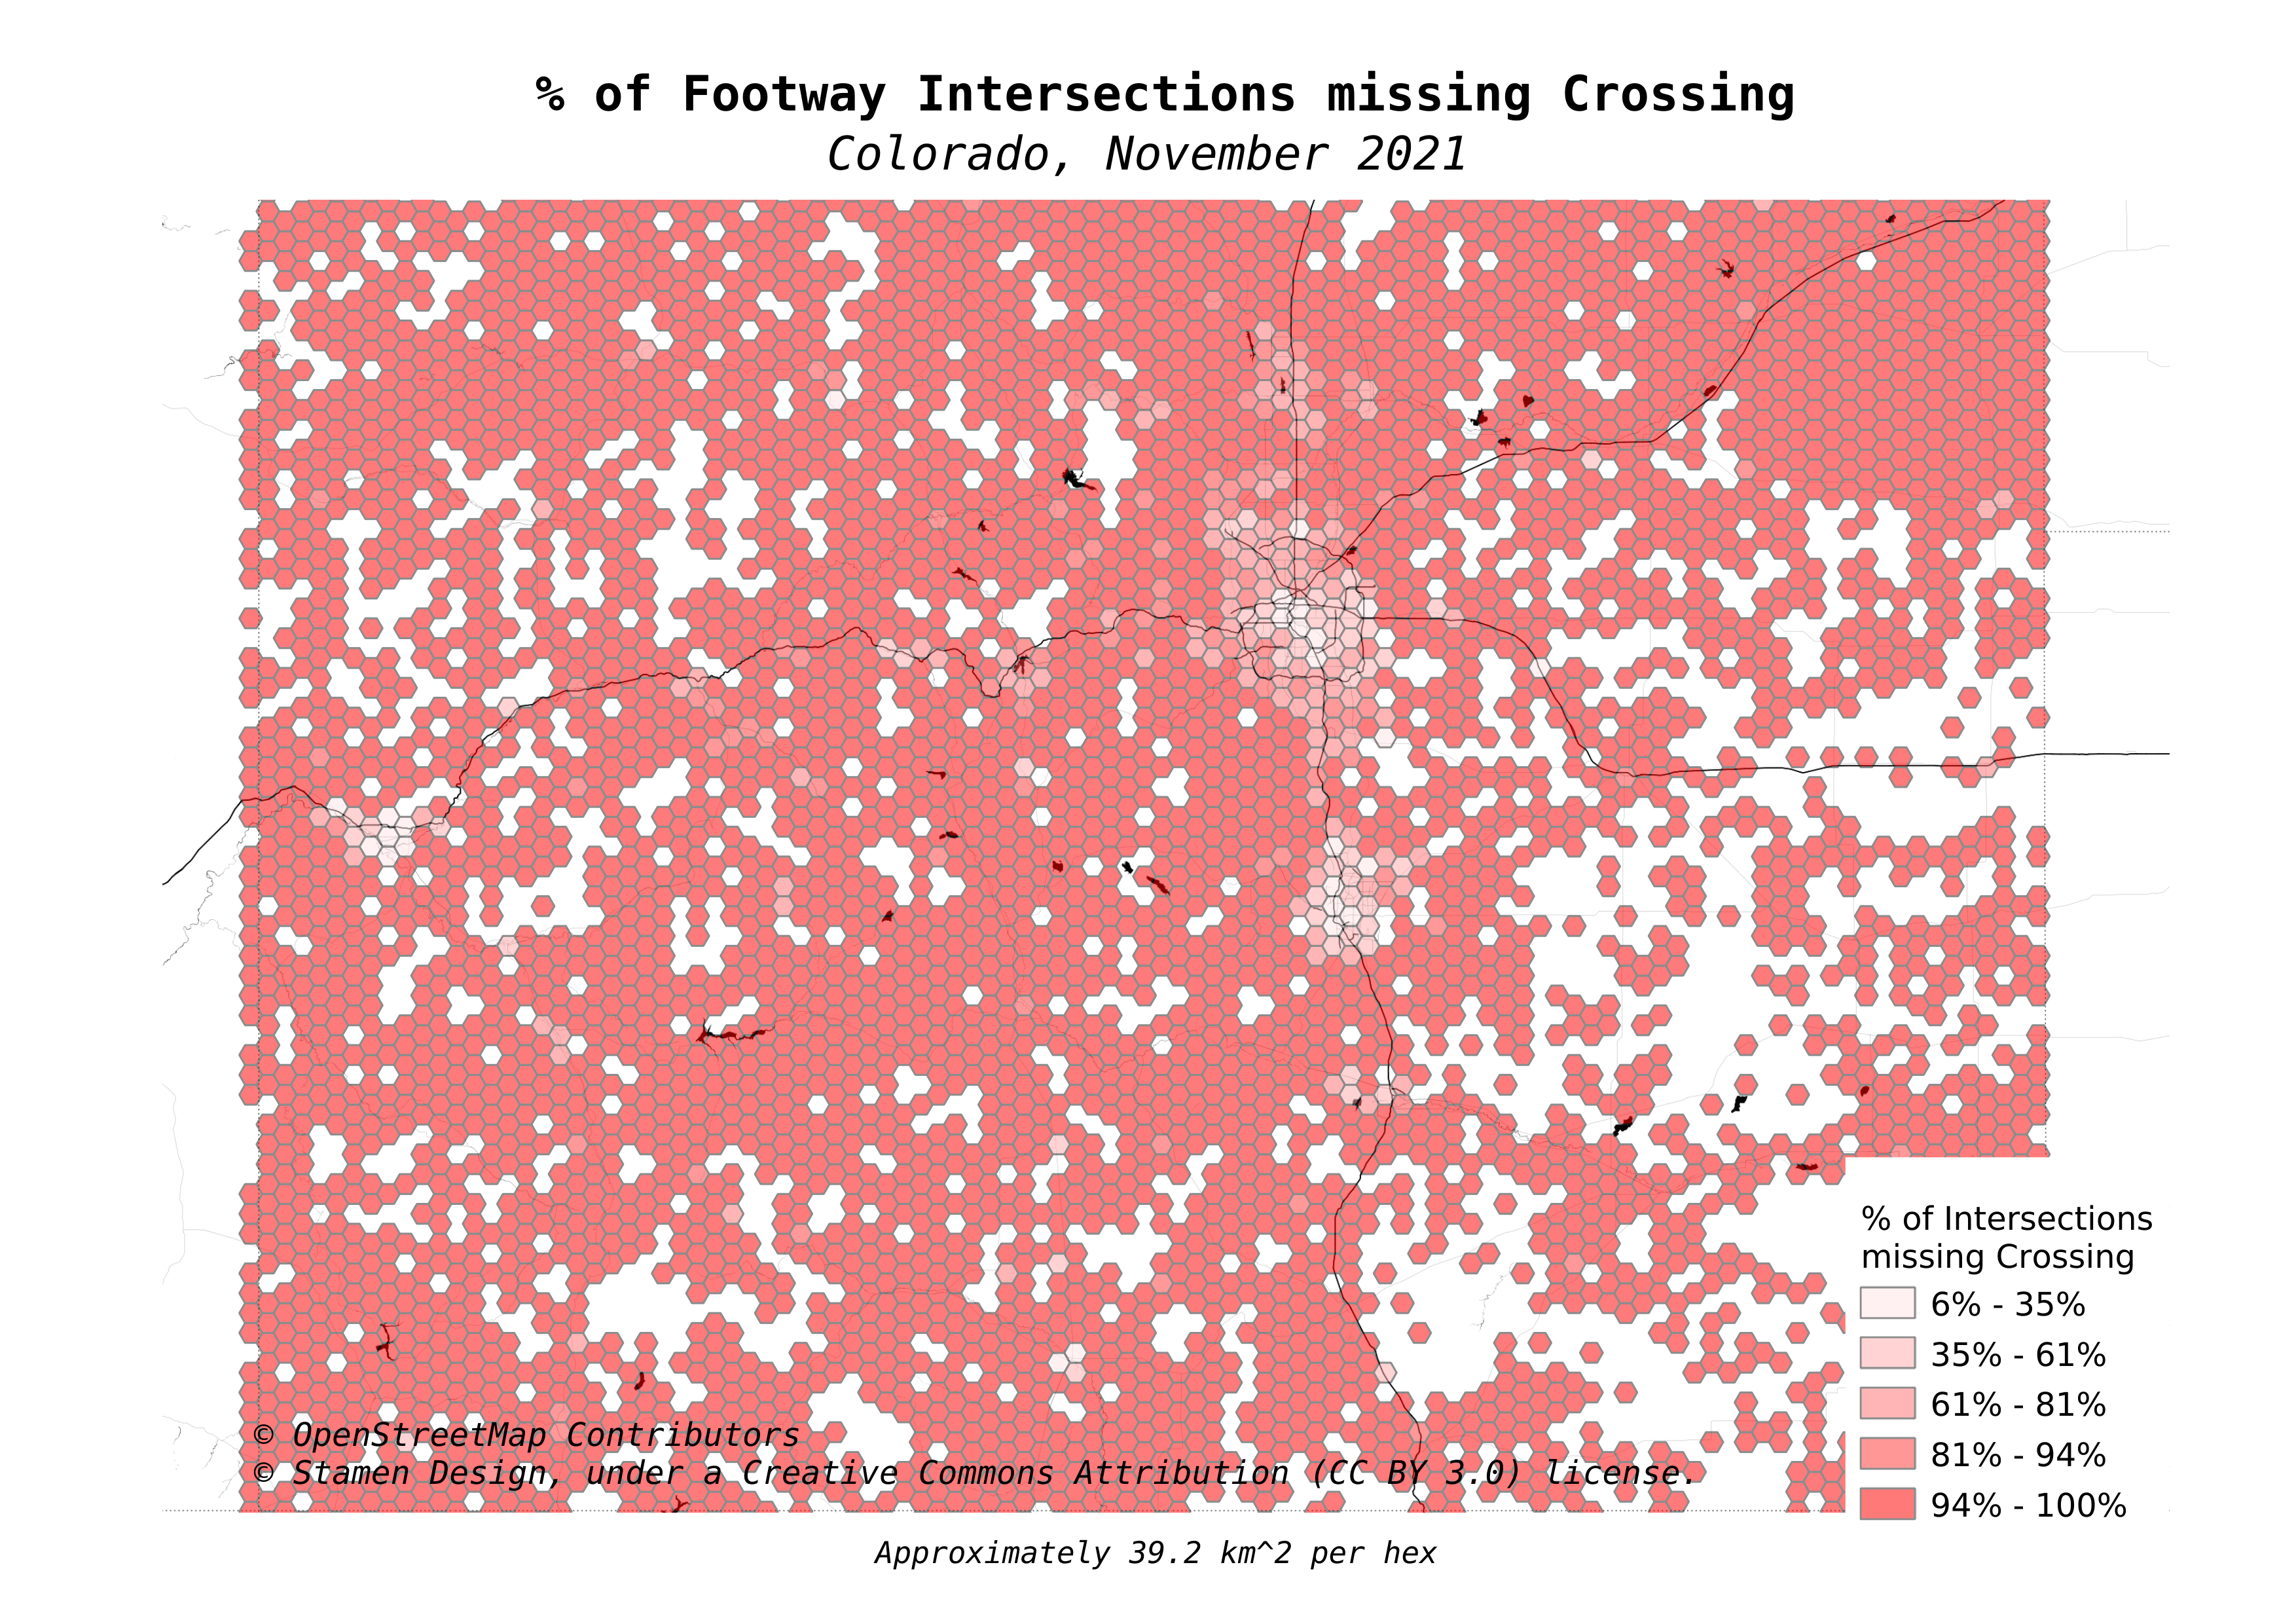 Map with shades of red indicating the % of missing crossing tags at foot/motor intersections.  The rural areas are almost entirely the dark red indicating 100% missing OR completely white because the hexagon is missing due to no footway data in that region.